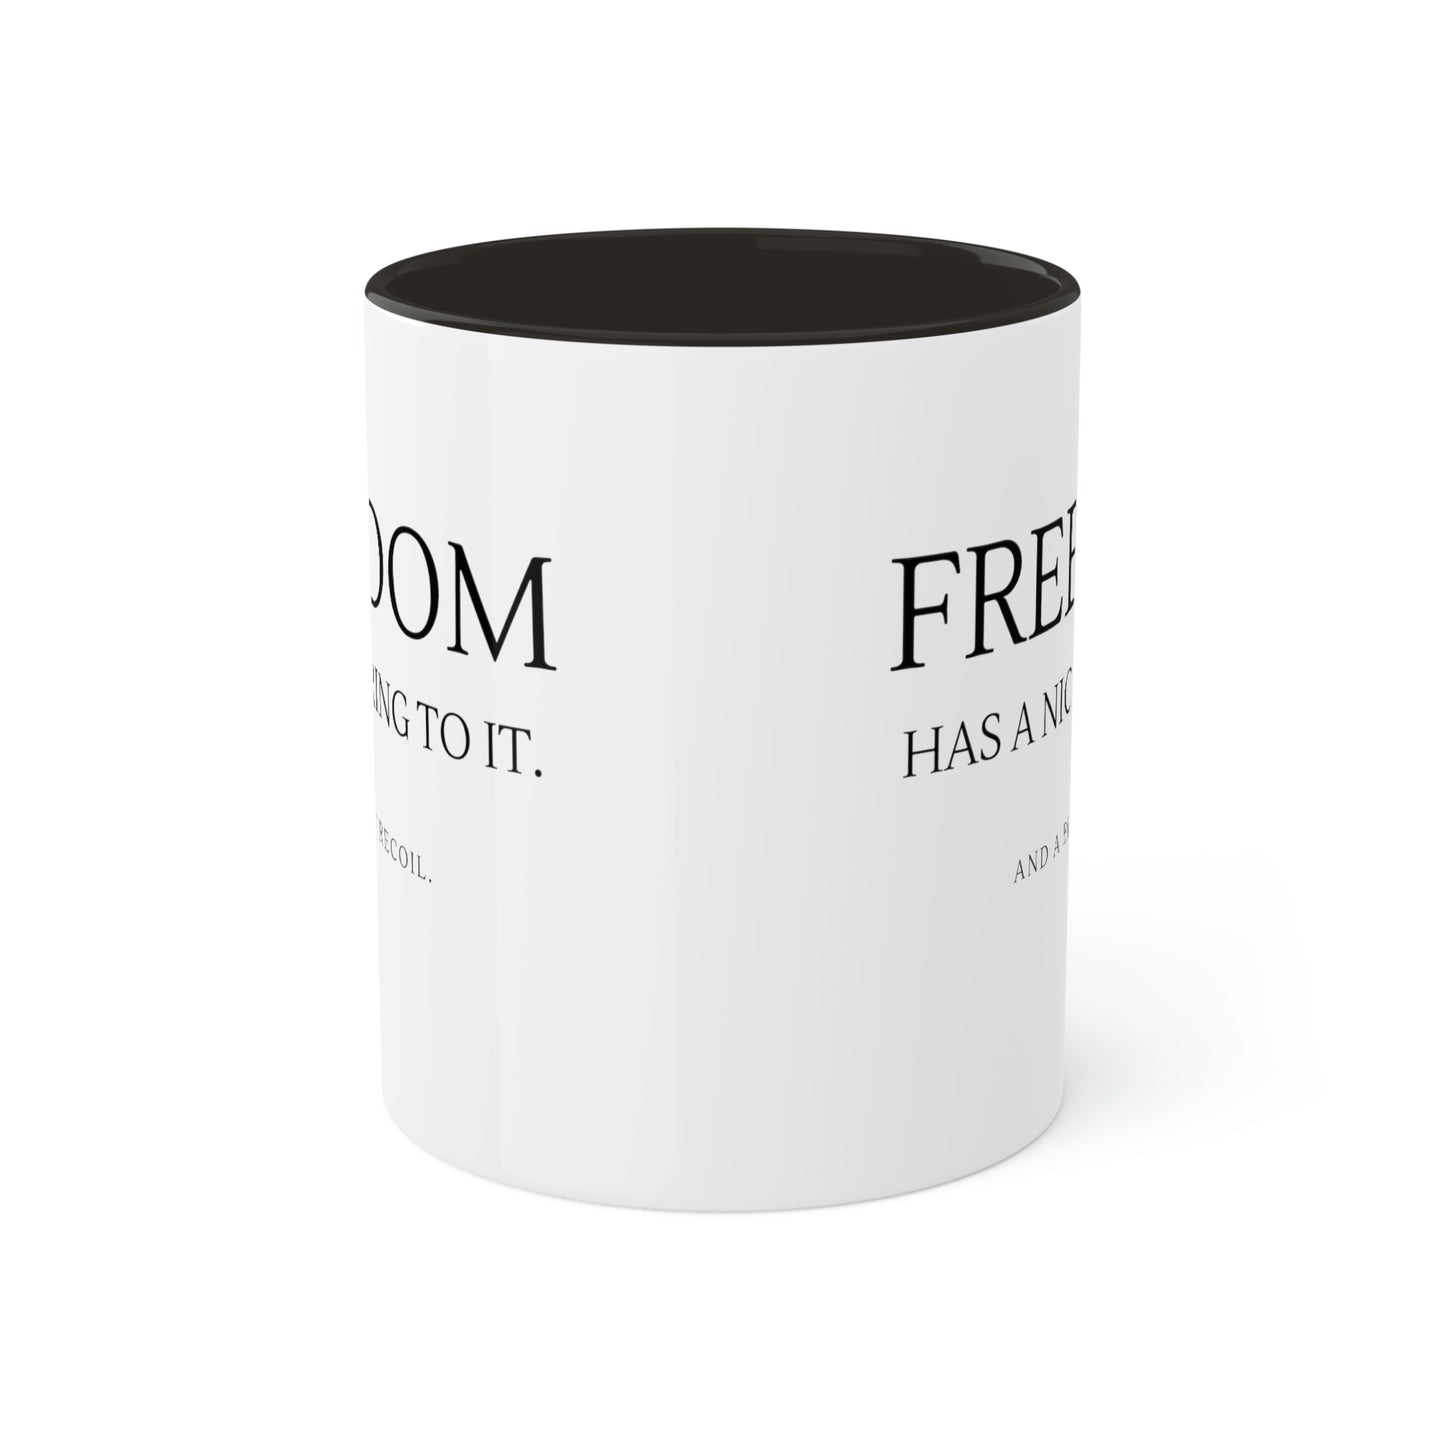 freedom-has-a-nice-ring-to-it-and-a-bit-of-recoil-glossy-mug-11-oz-2a-front